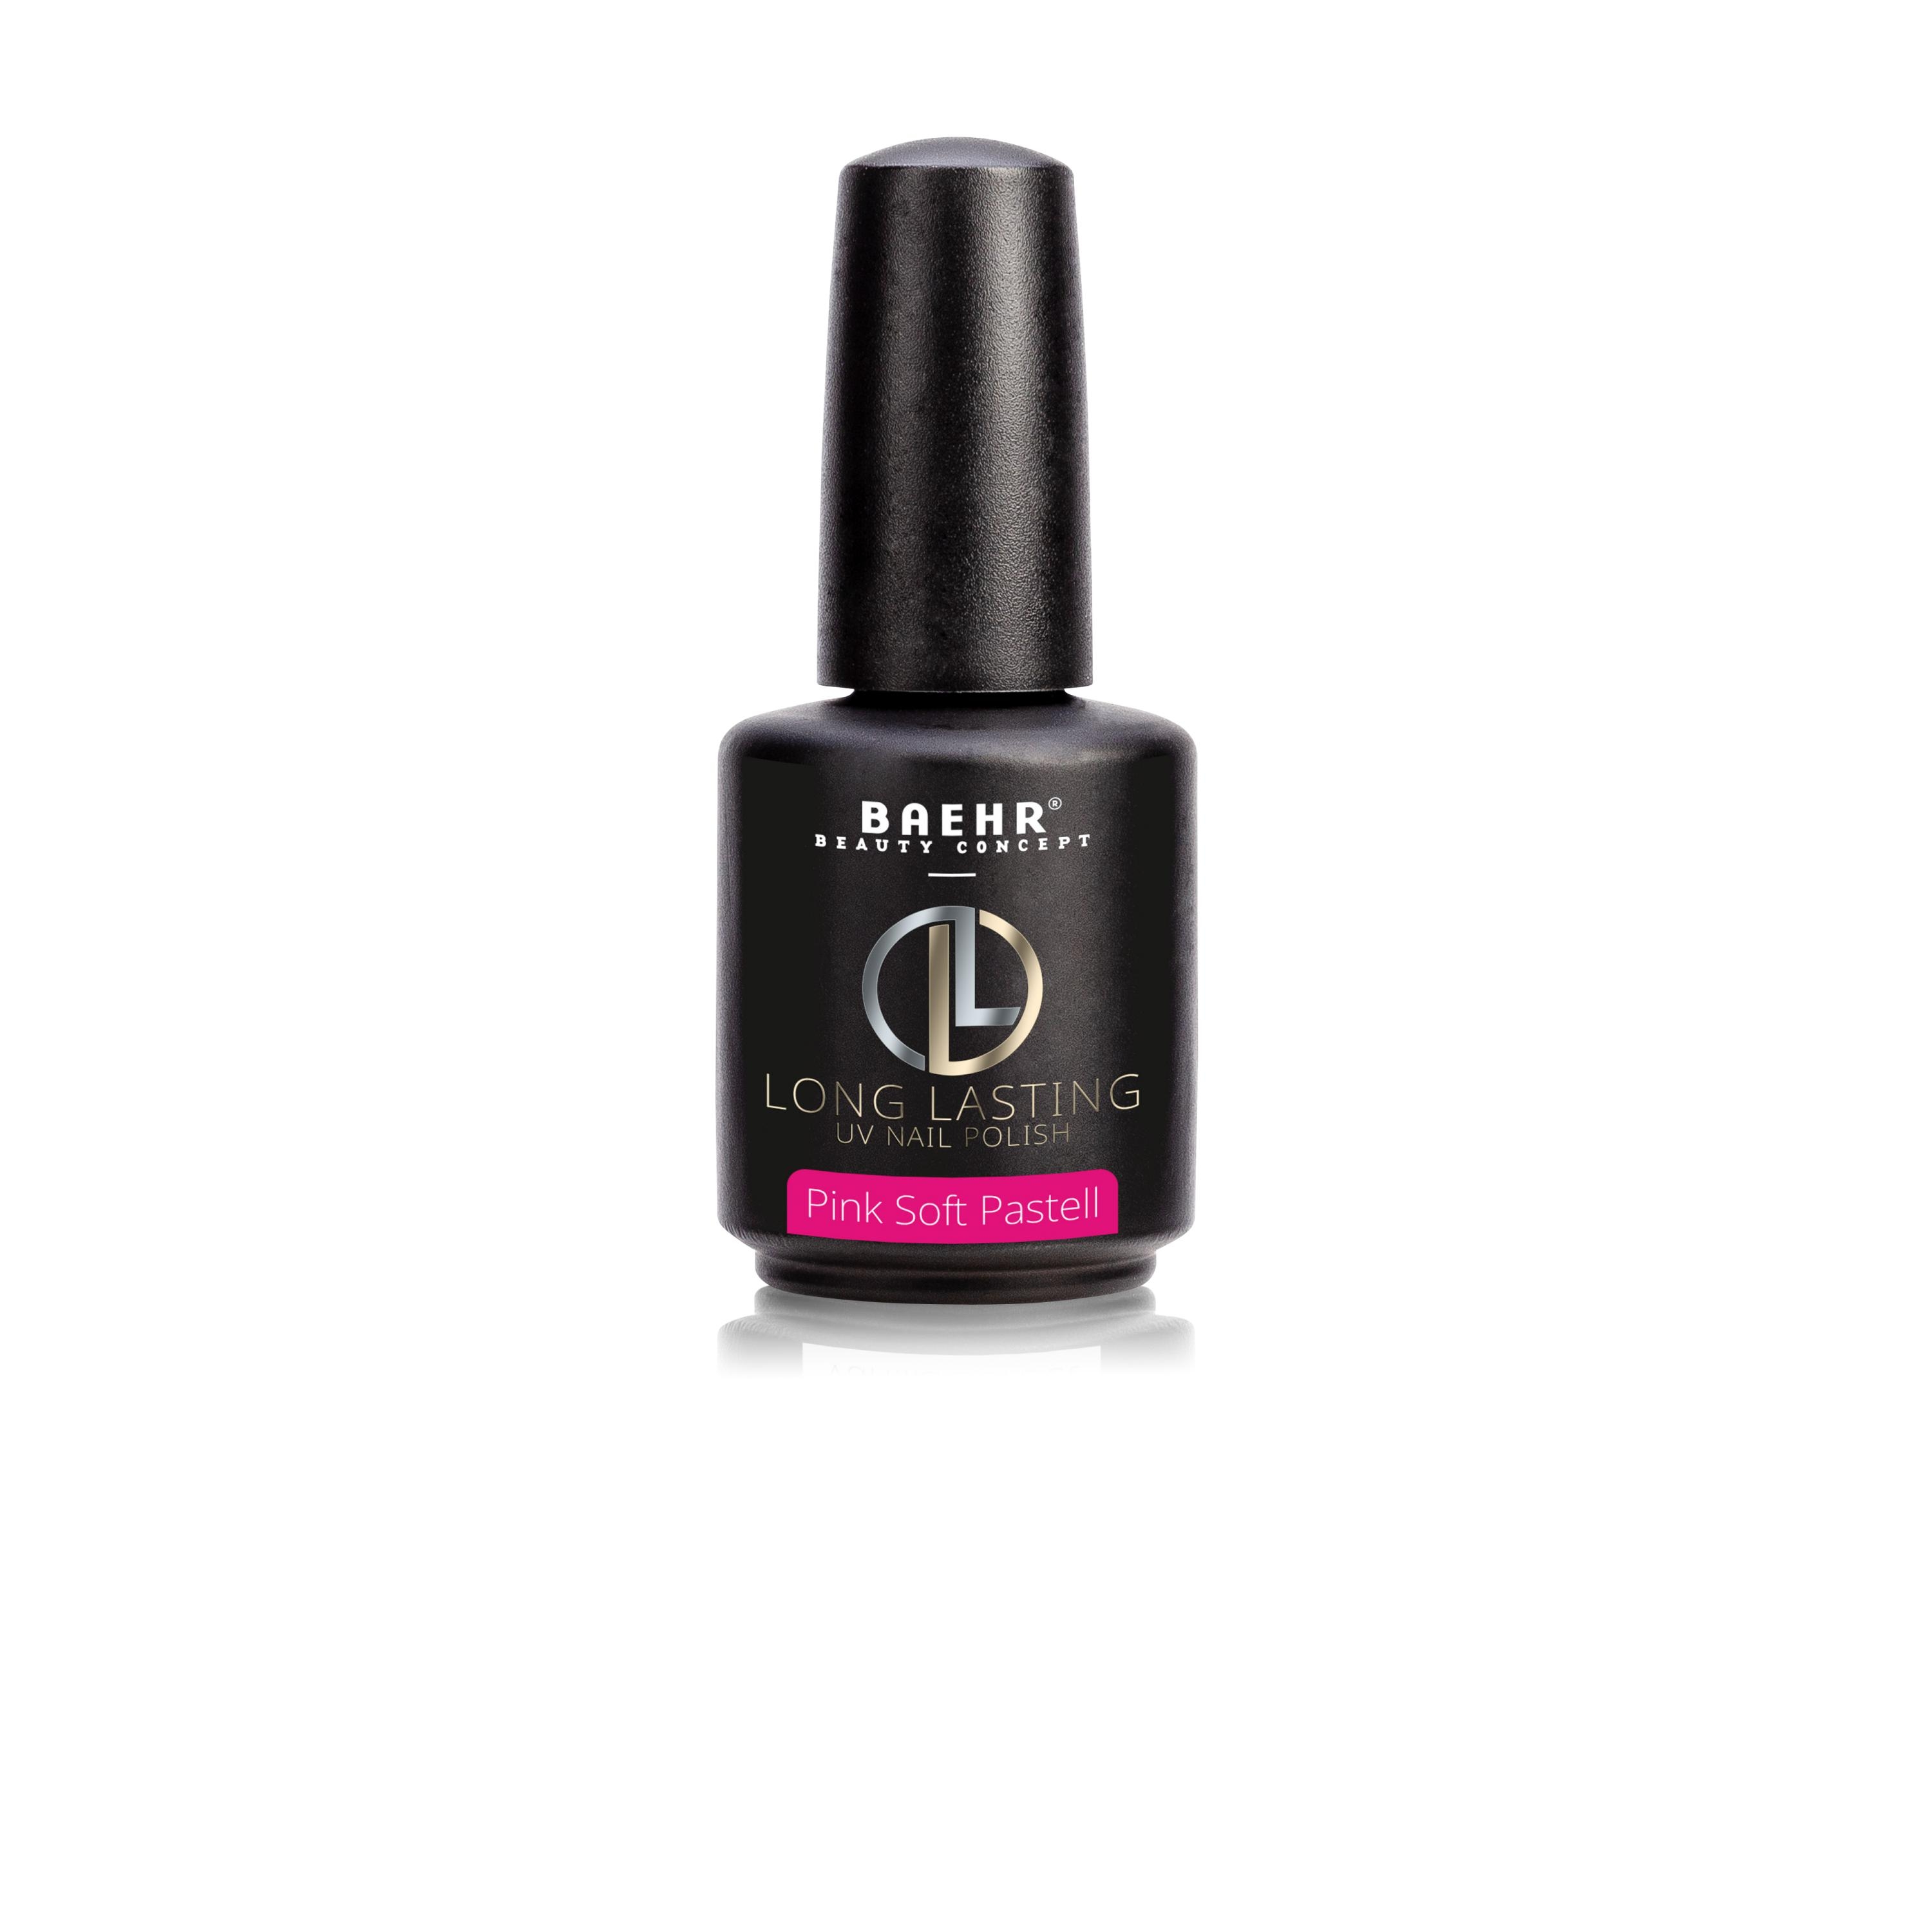 BAEHR BEAUTY CONCEPT - NAILS Long-Lasting Pink Soft Pastell 12 ml